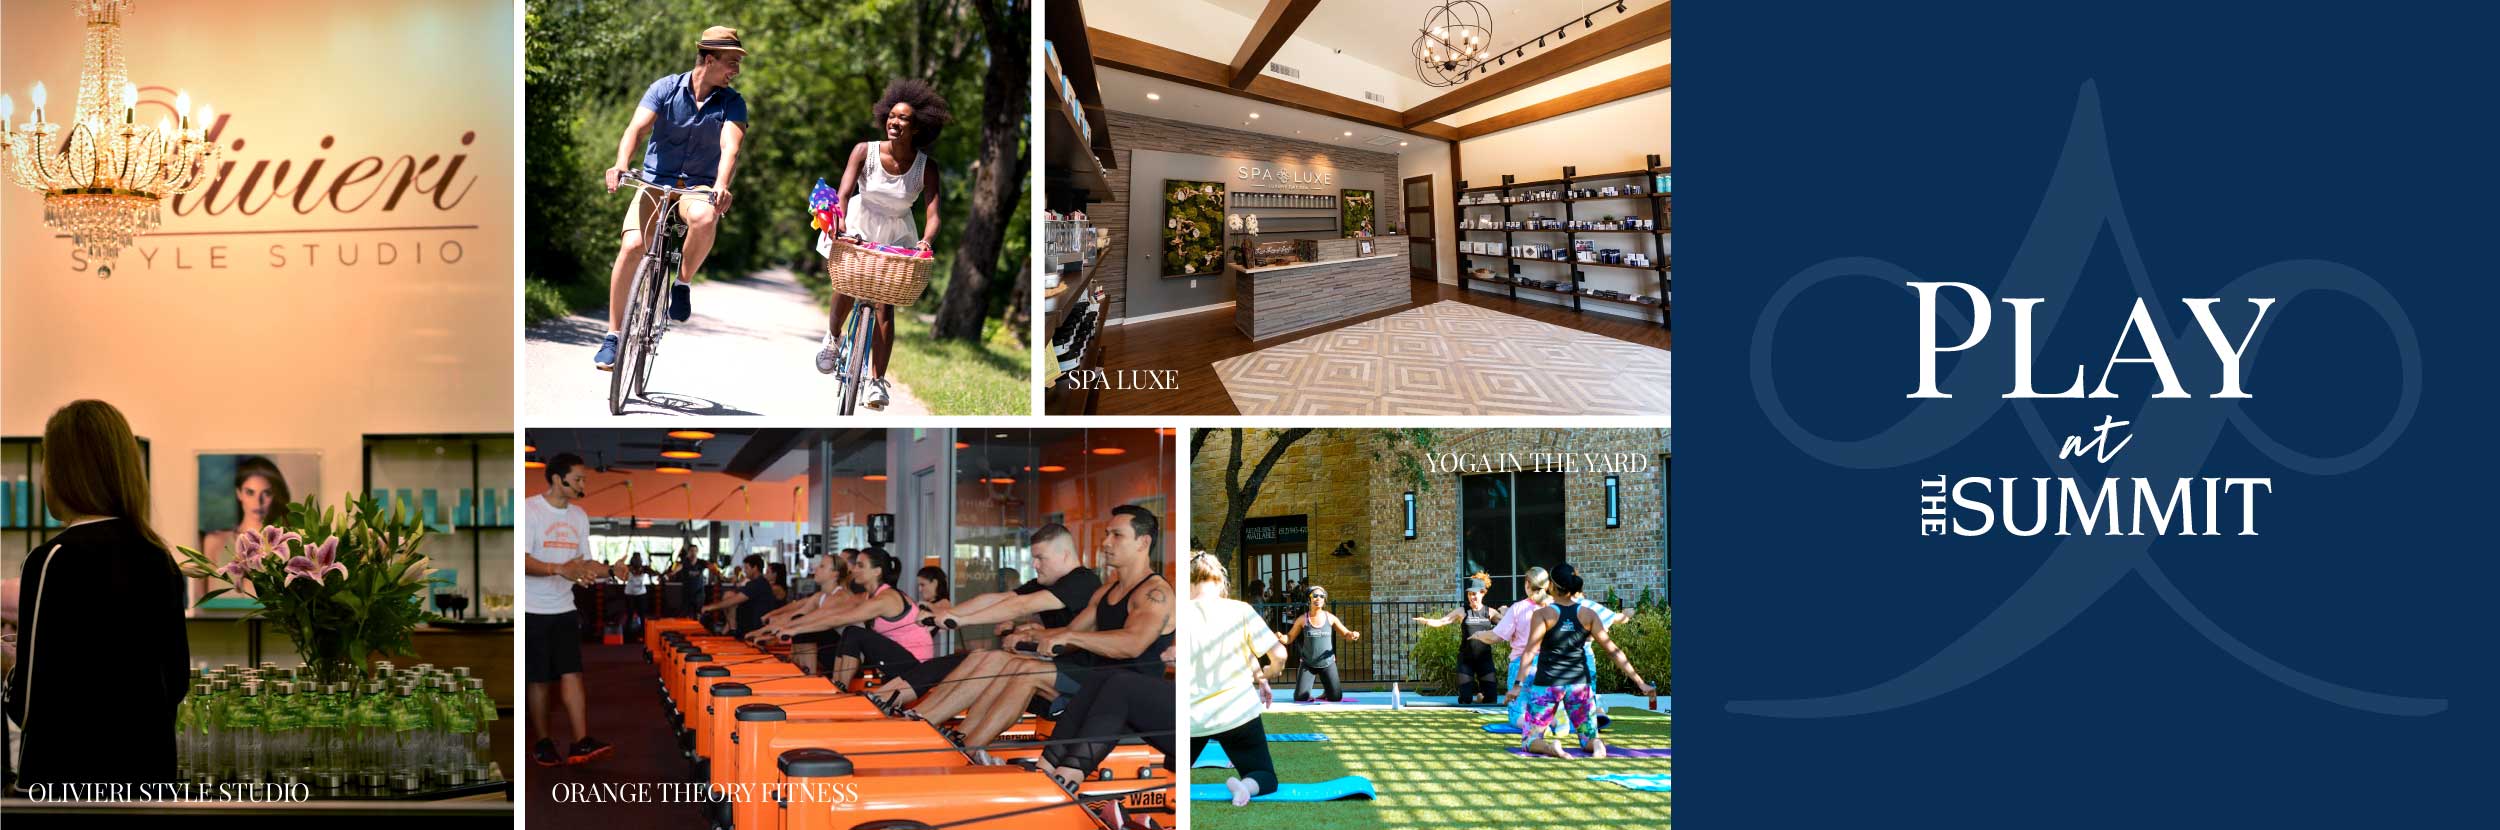 Olivieri Style Studio, Orange Theory Gym, Spa Luxe Massage Facials Manicures Pedicures at The Summit at Rivery Park